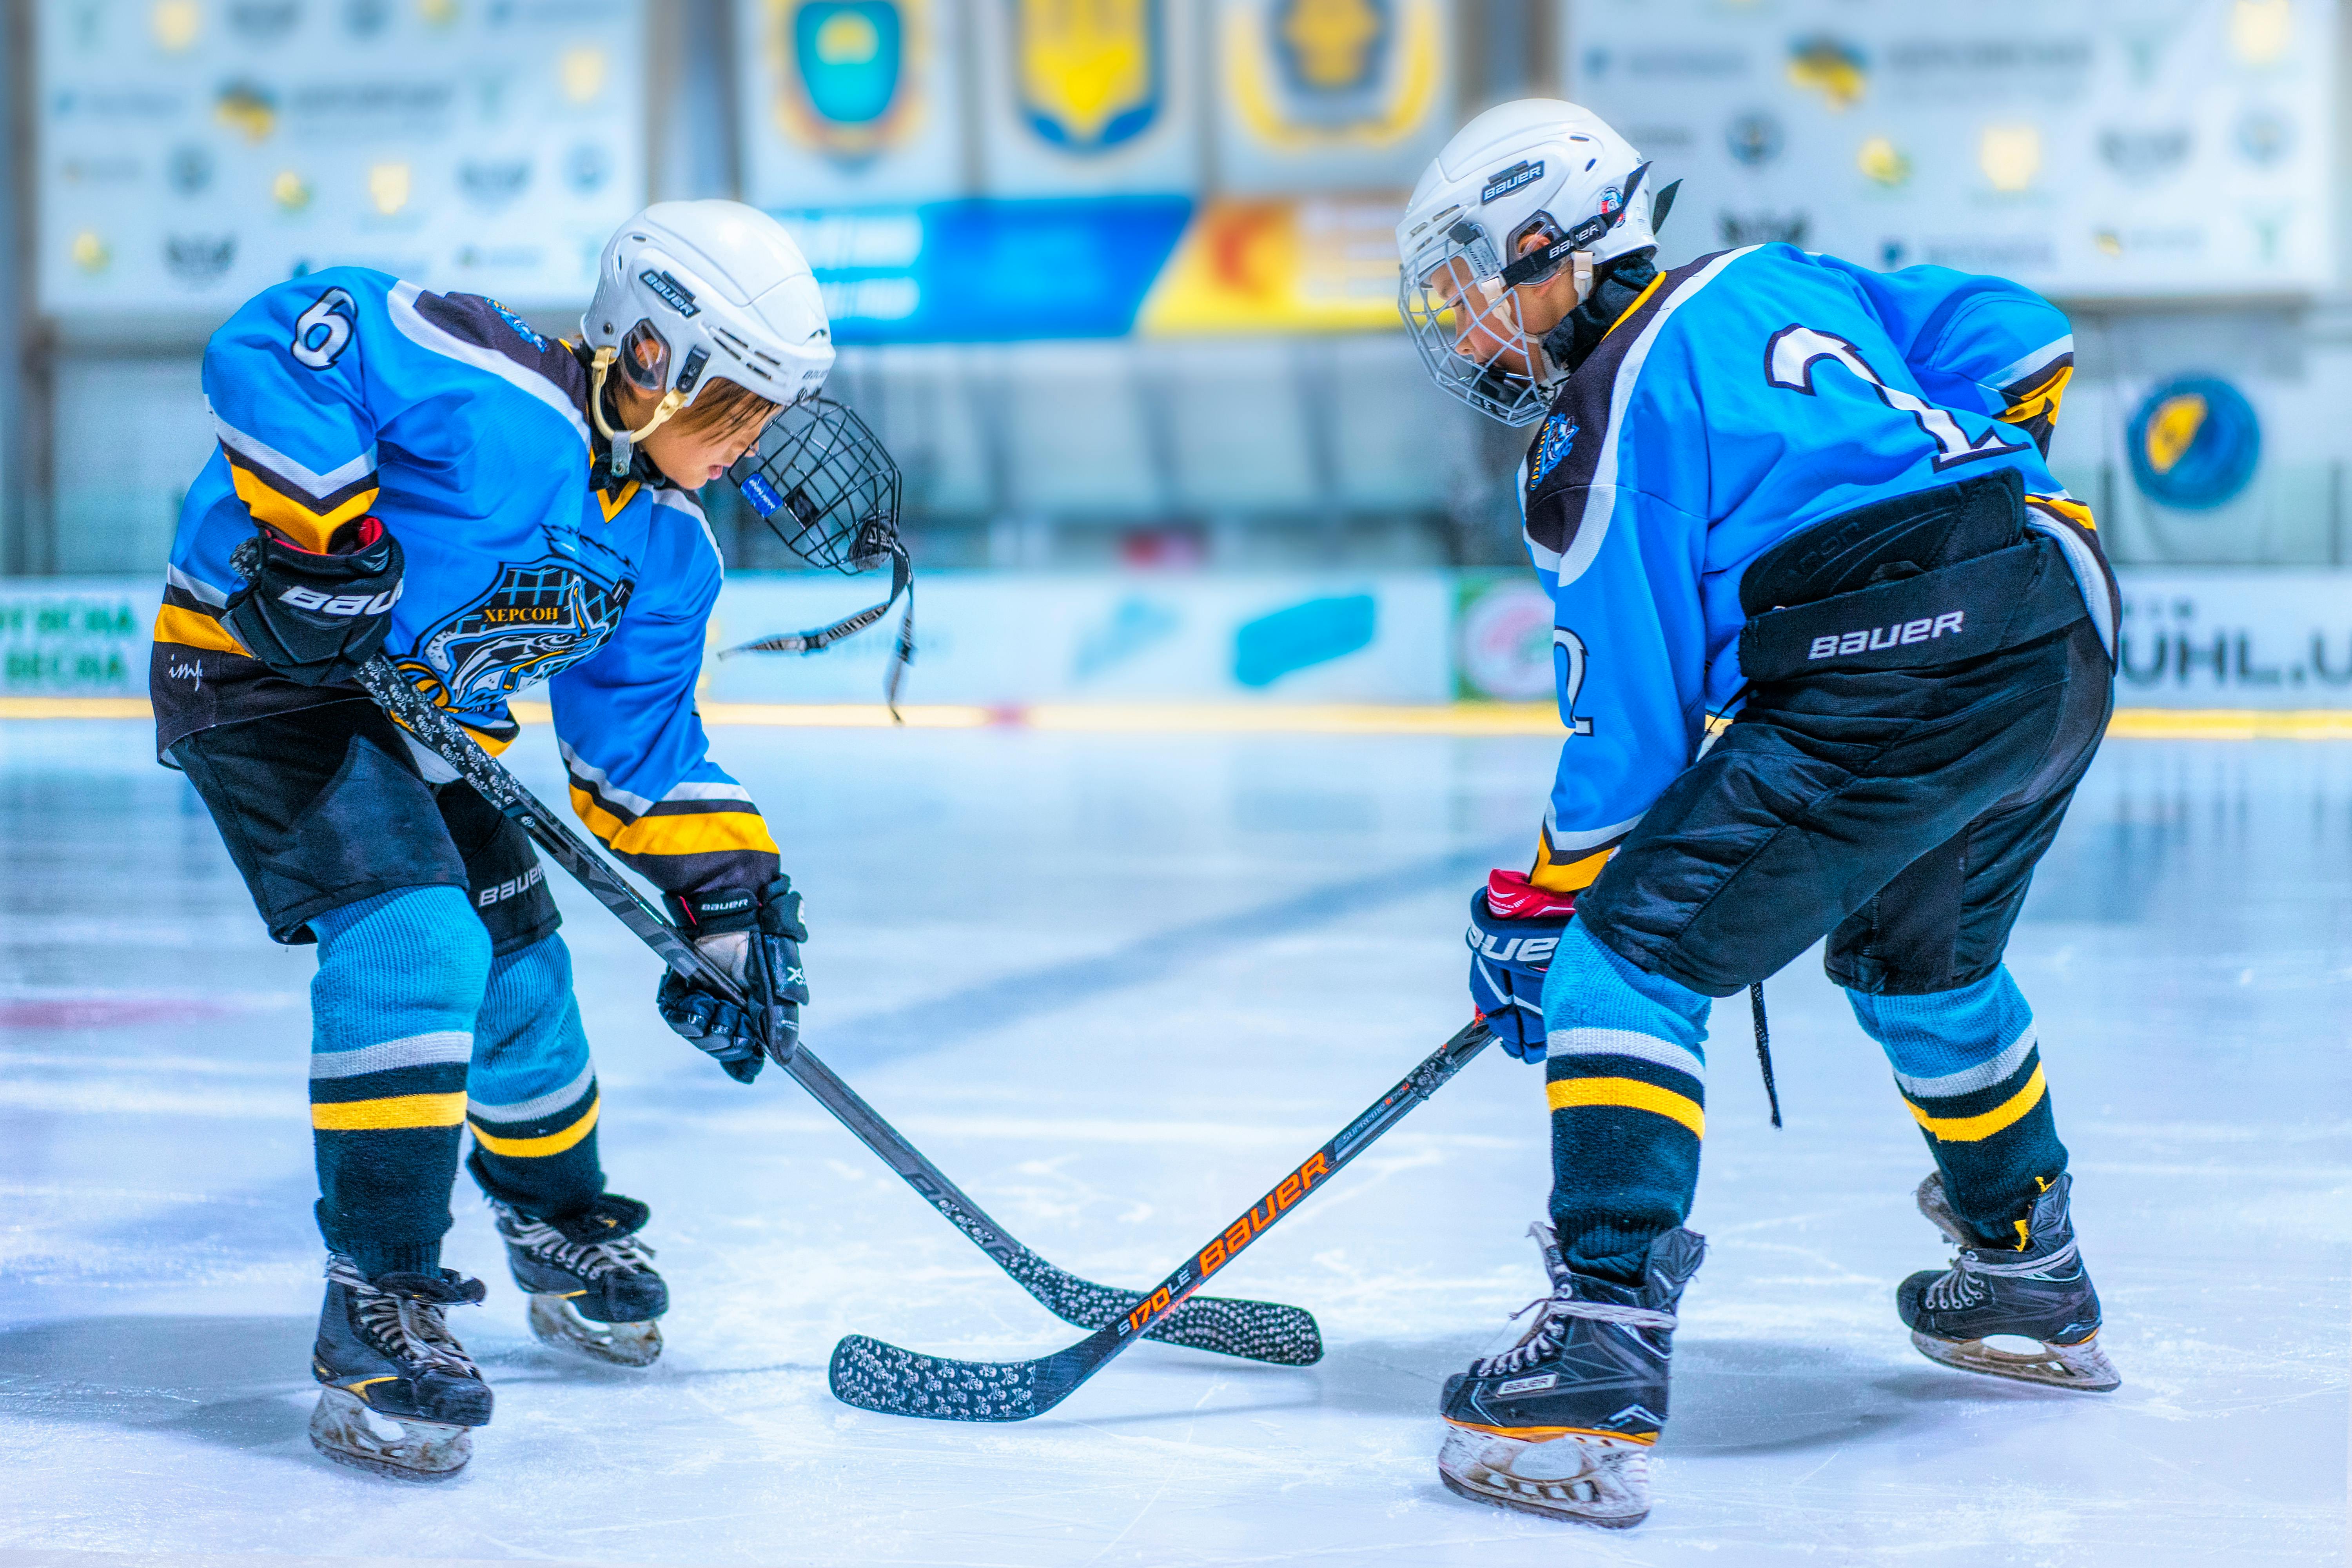 two-hockey-players-on-rink-free-stock-photo